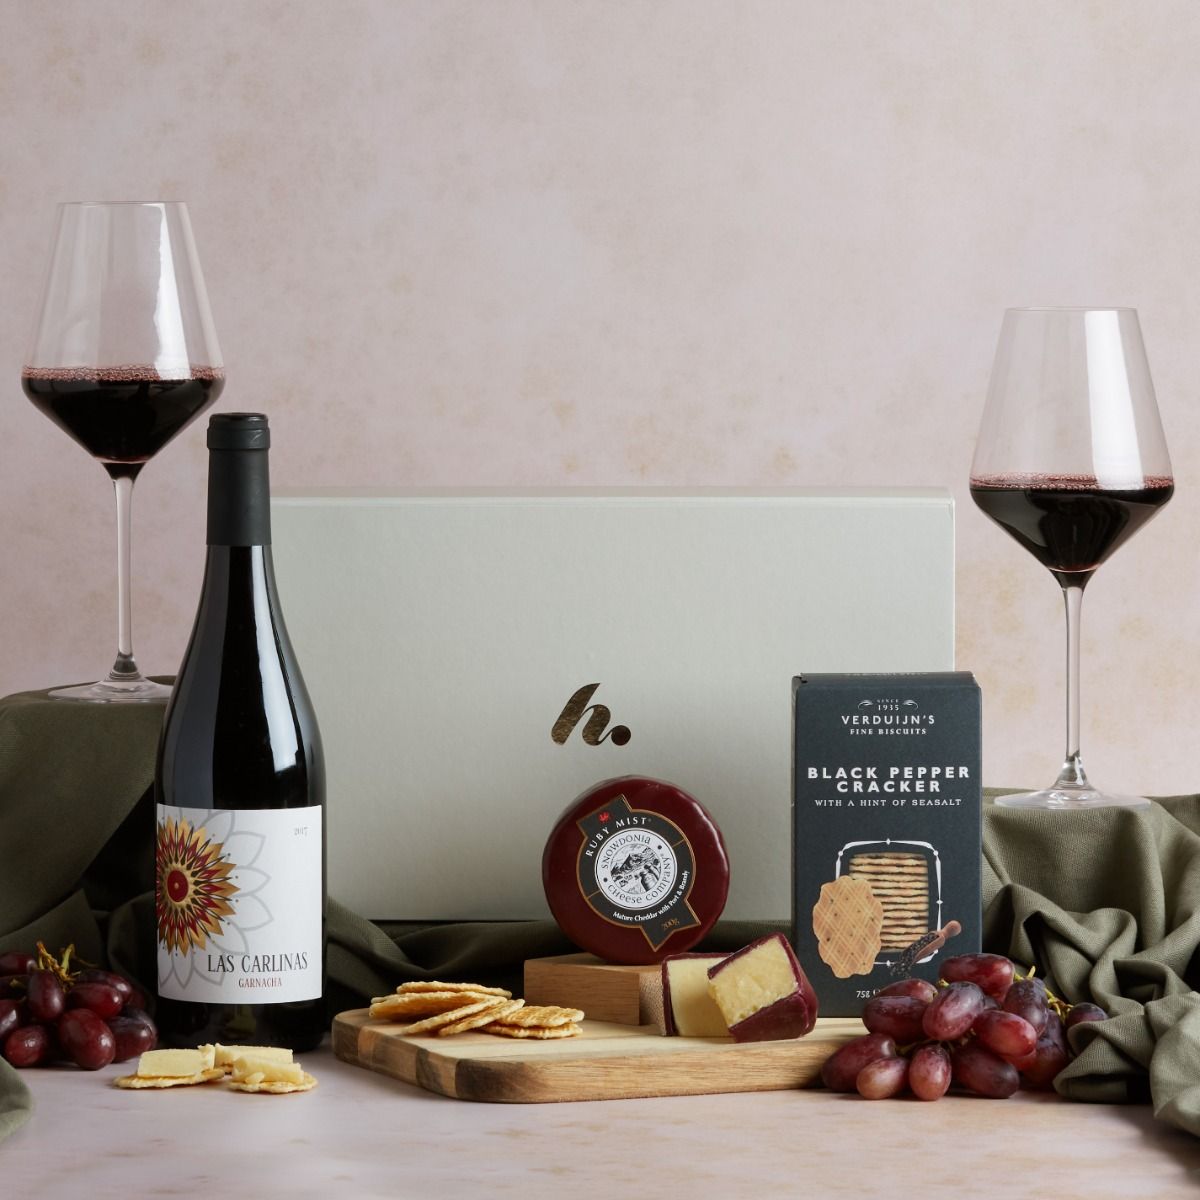 Classic Wine and Cheese gift with contents on display and a glass of red wine